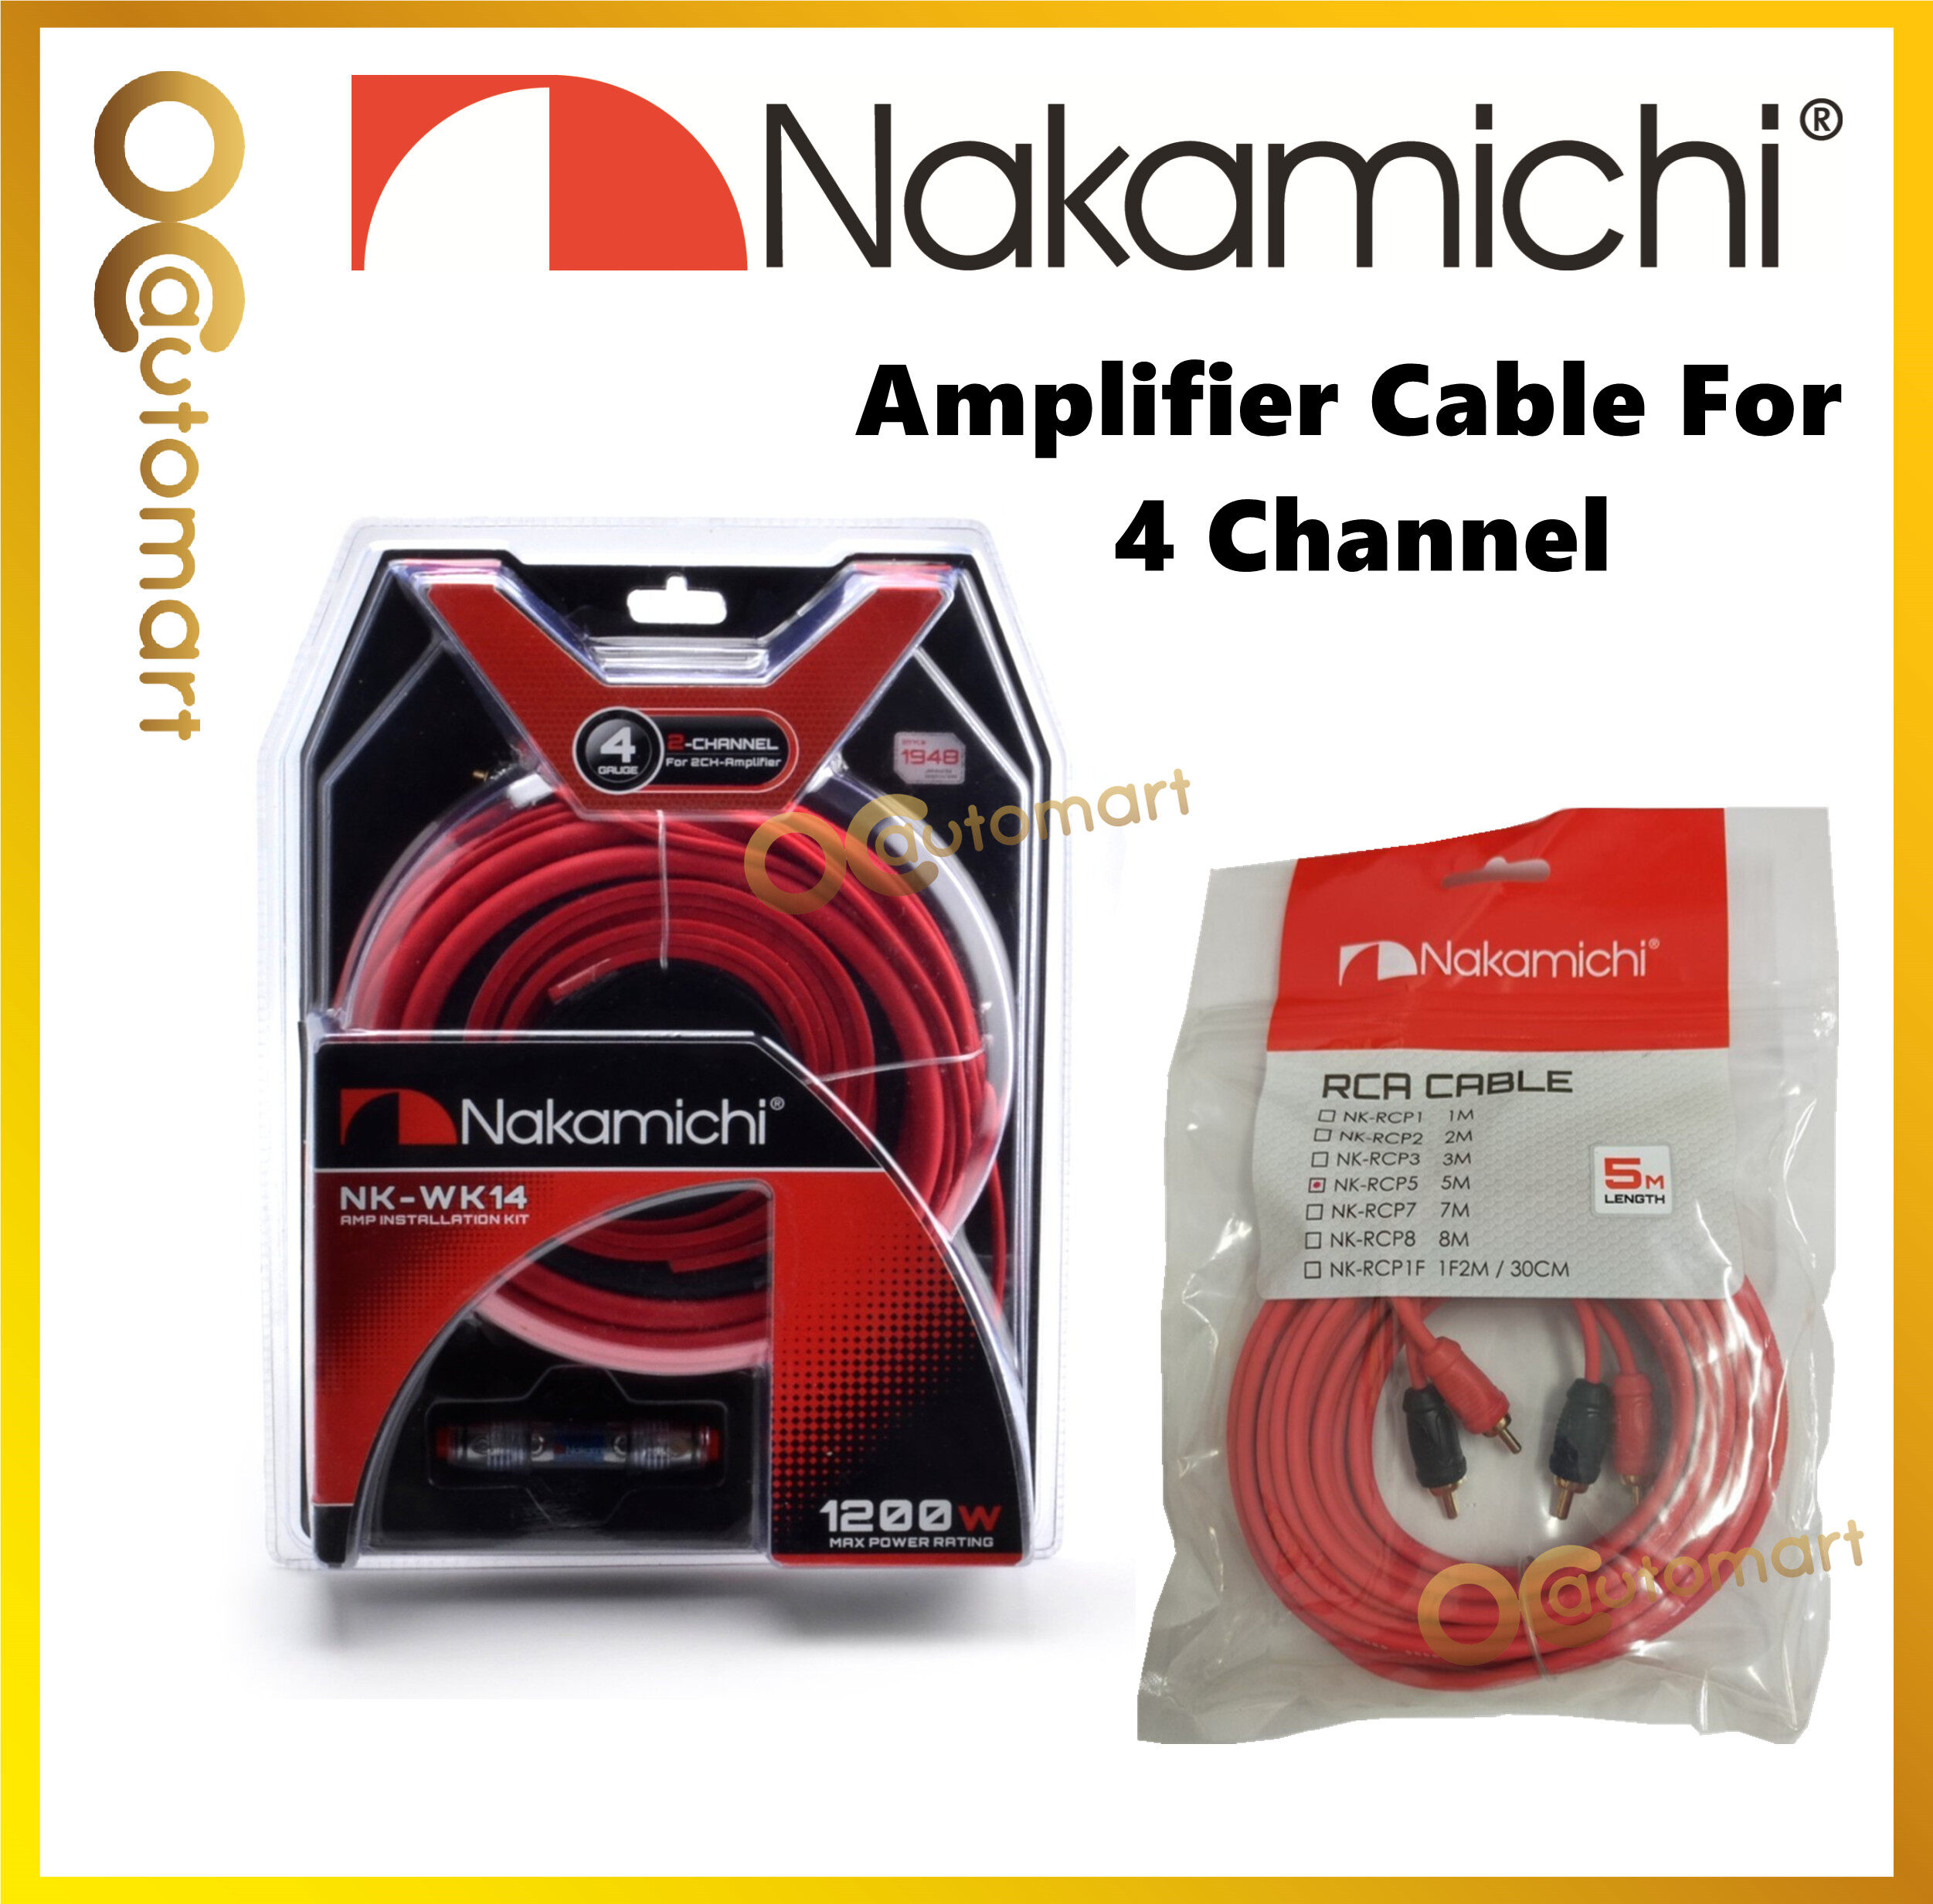 Nakamichi 4 Channel Cable Set 4GA Wiring Kit NK-WK14 And 5 Meter RCA NK-RCP5 Cable Set For Amplifier 4-Channel